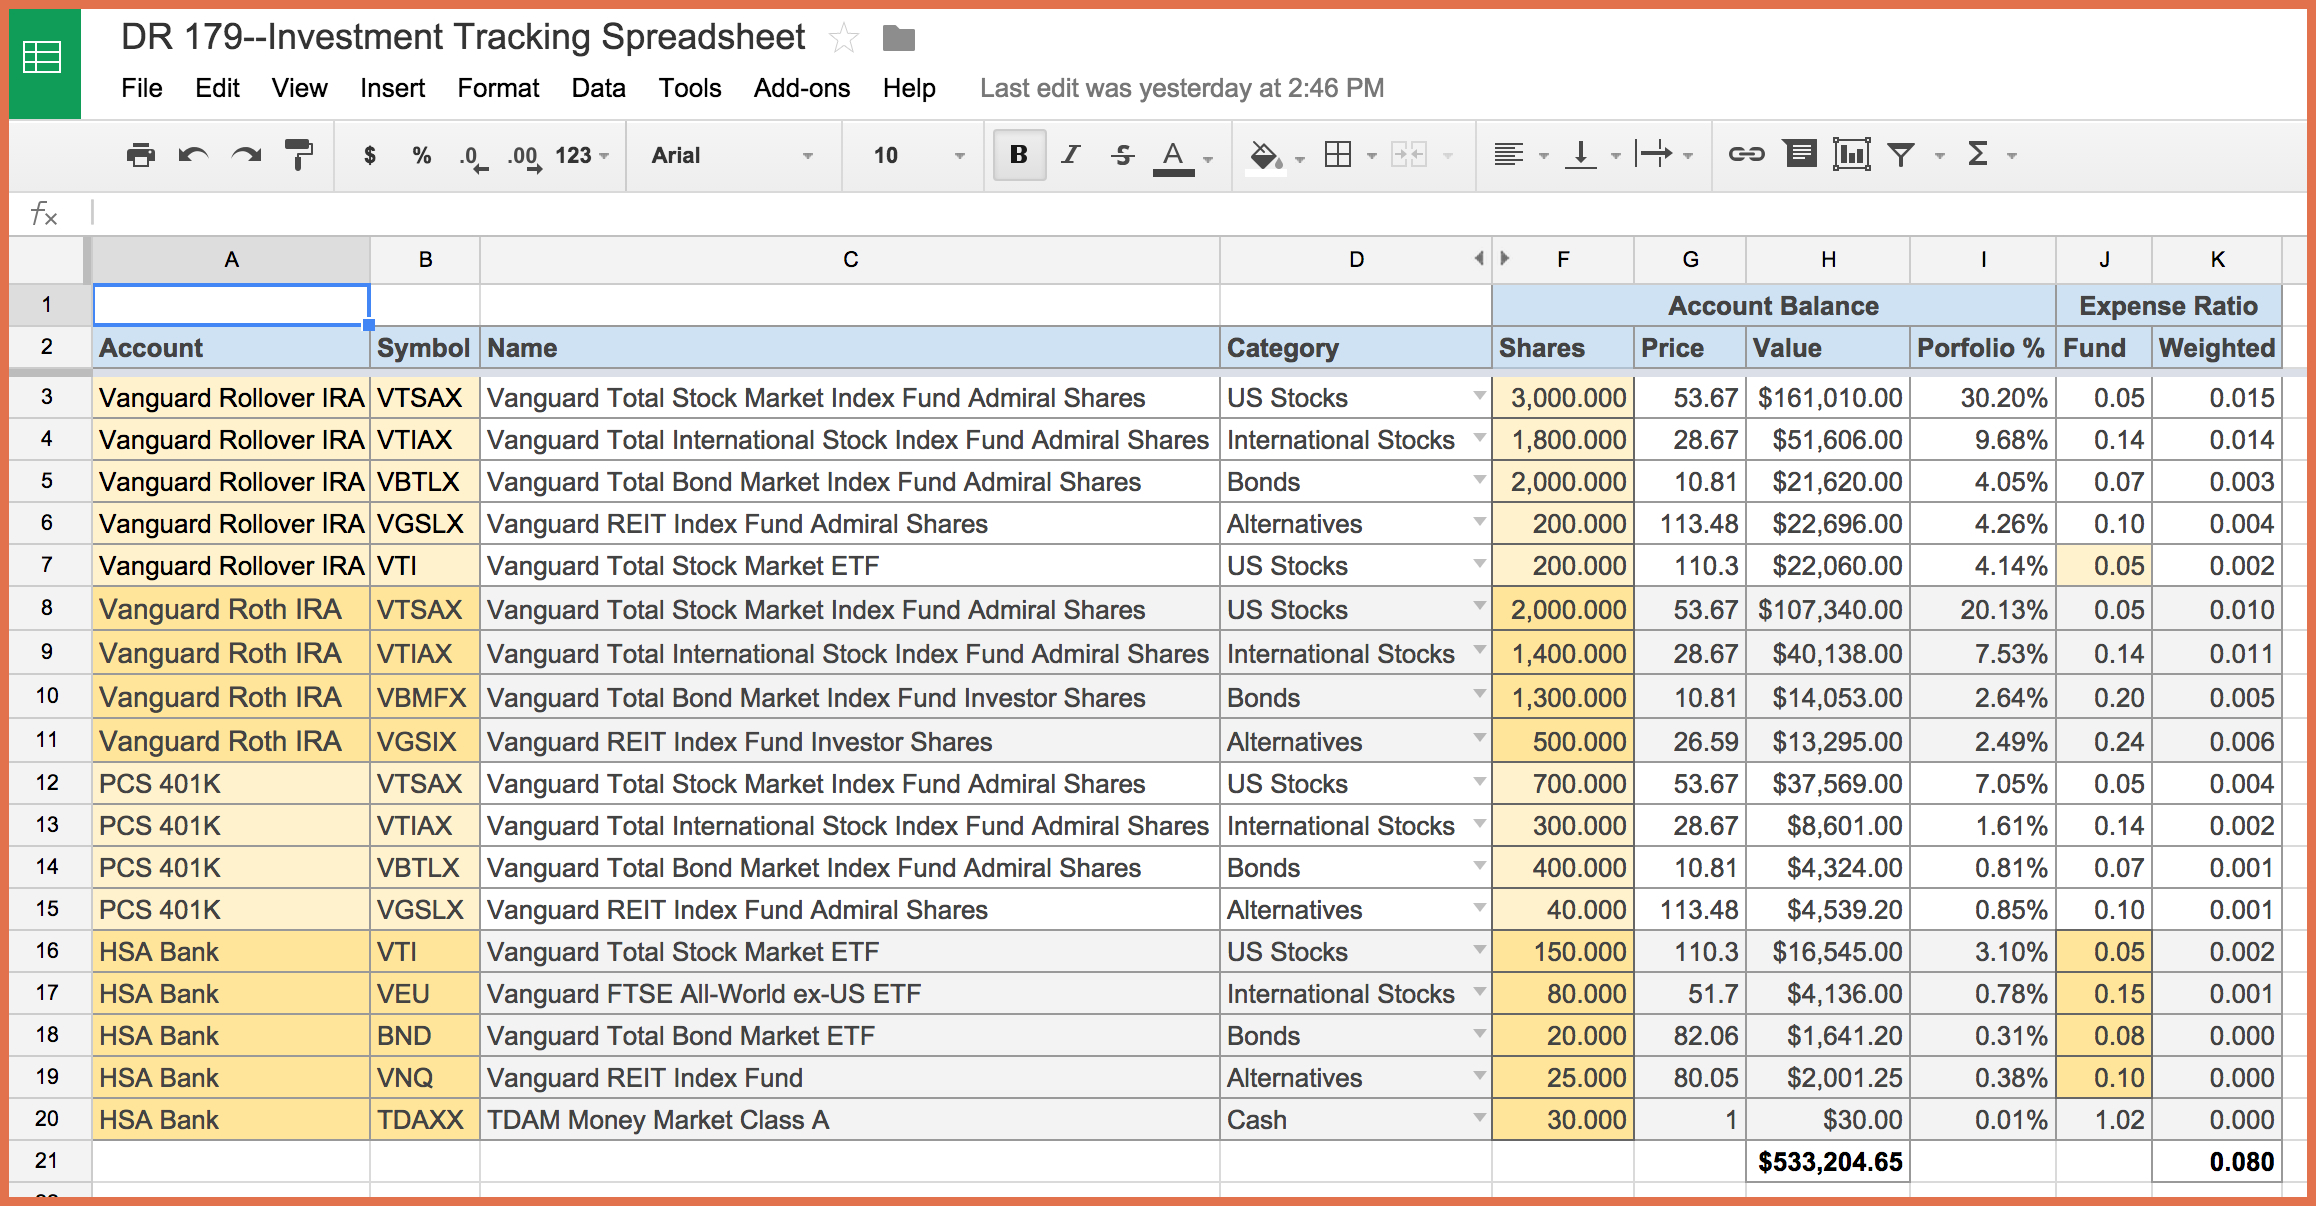 Credit Card Tracking Spreadsheet Template db excel com